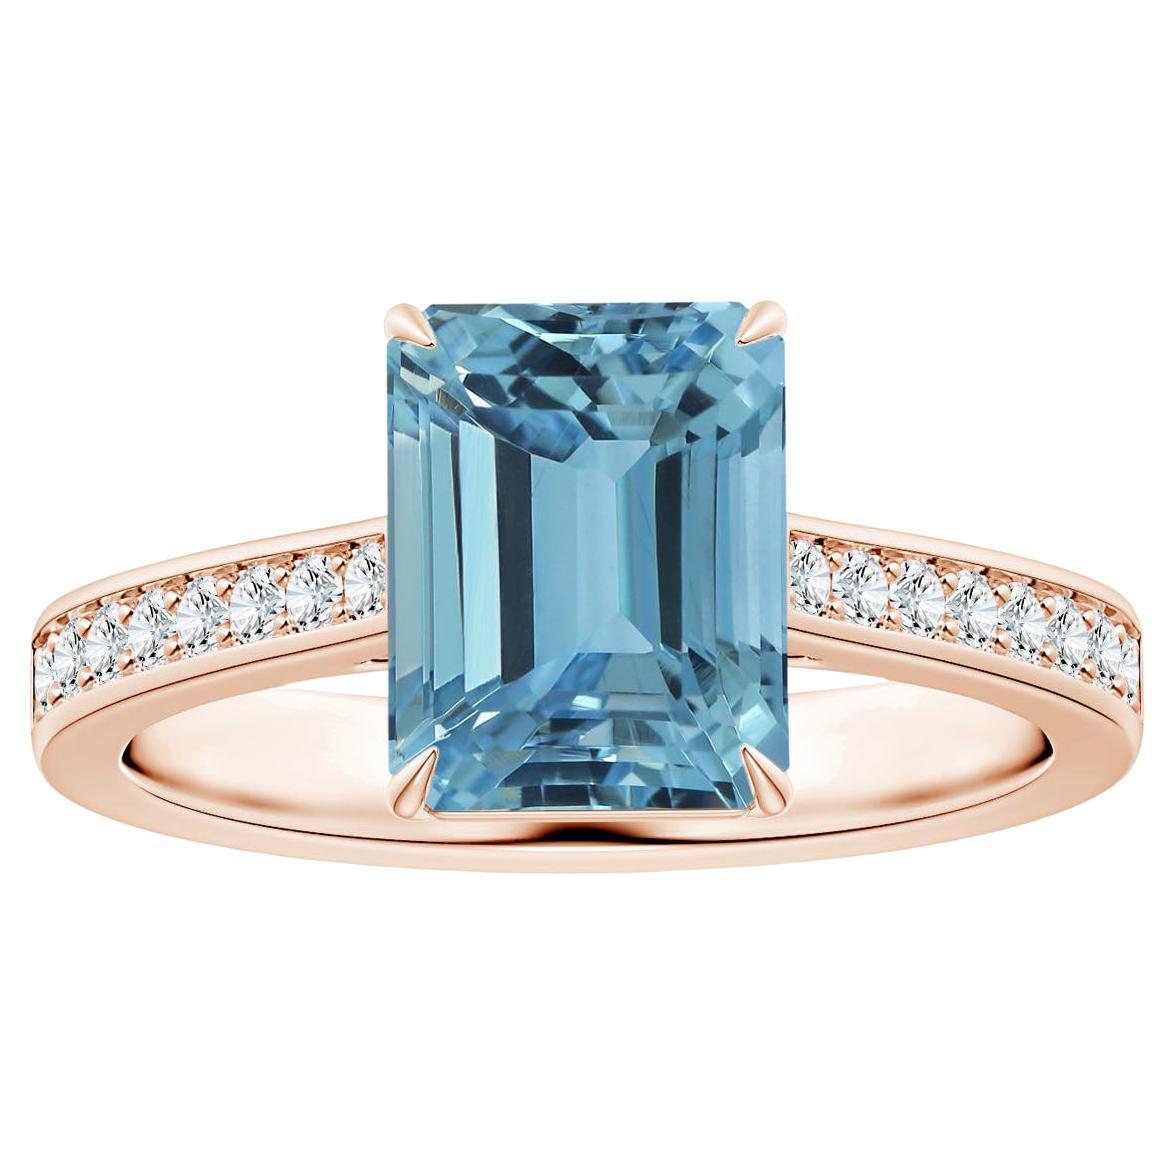 For Sale:  Angara Gia Certified Emerald-Cut Aquamarine Ring in Rose Gold with Diamond Shank